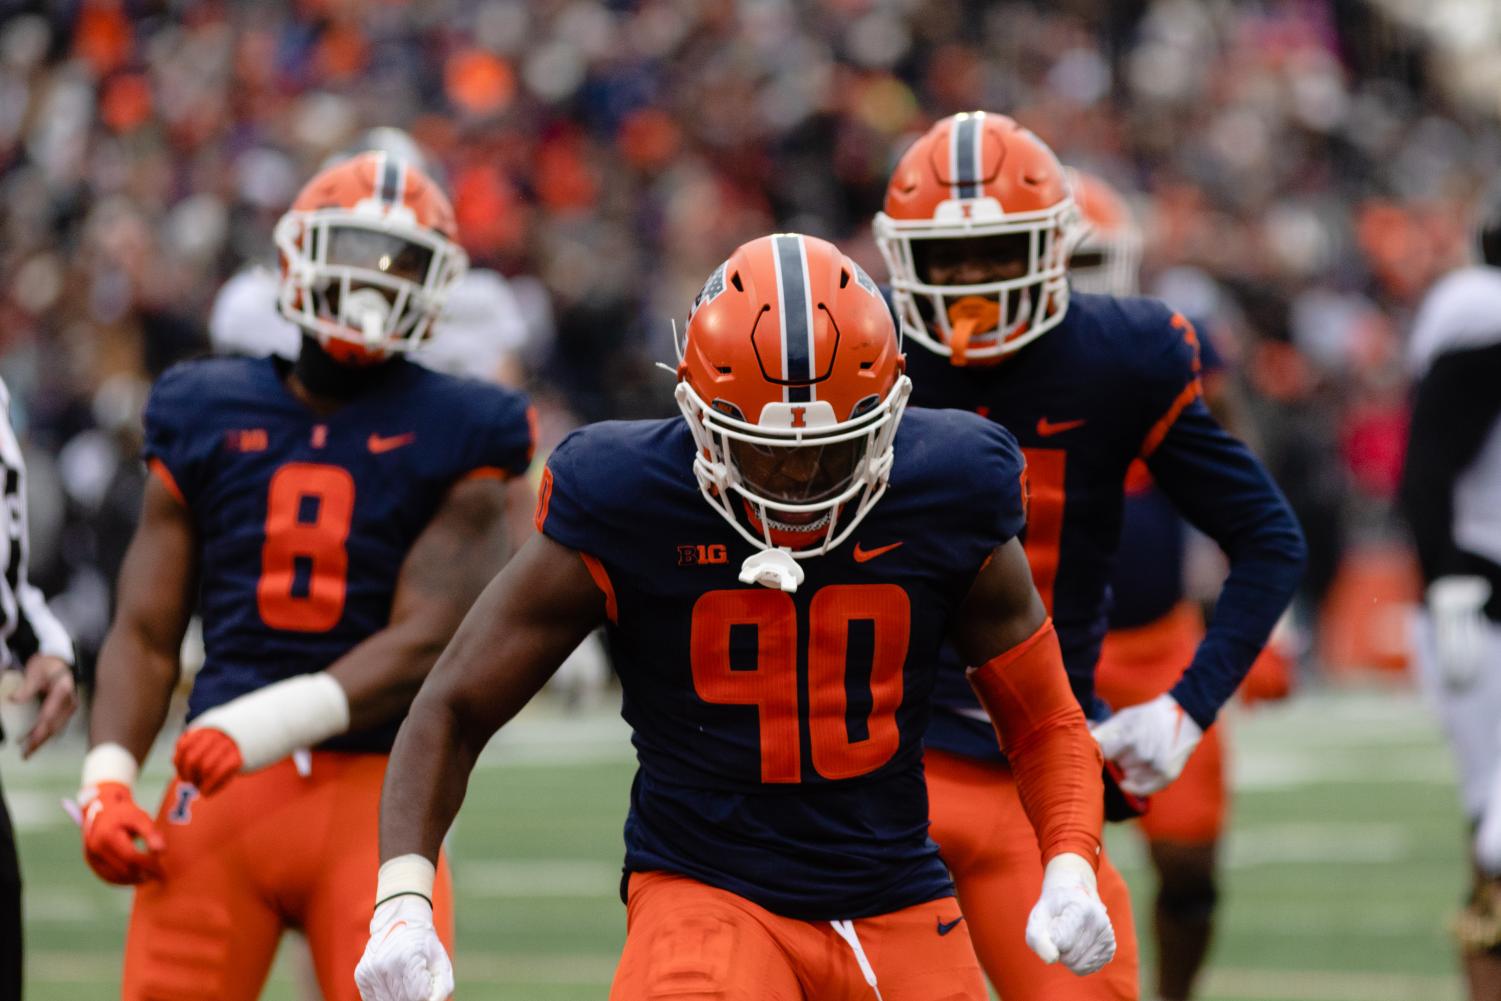 A Definitive Ranking of Illinois Athletics Uniforms - The Champaign Room